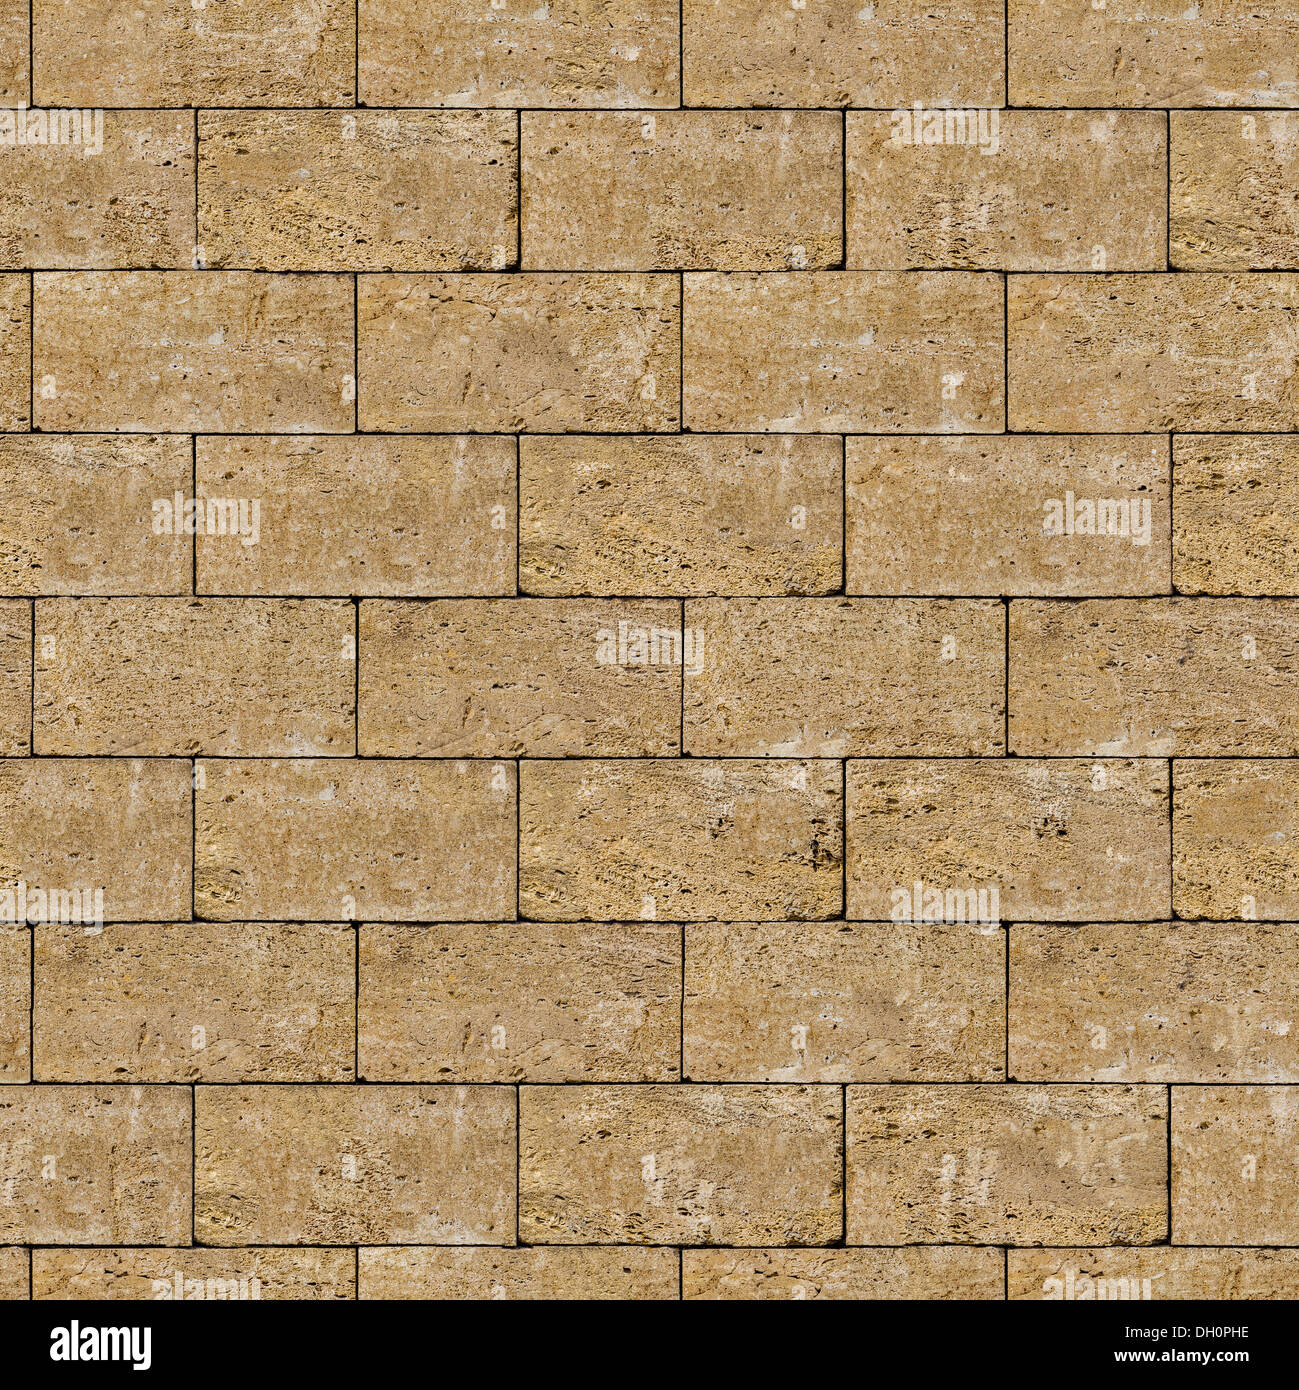 Seamless Tileable Texture of Coquina Wall. Stock Photo